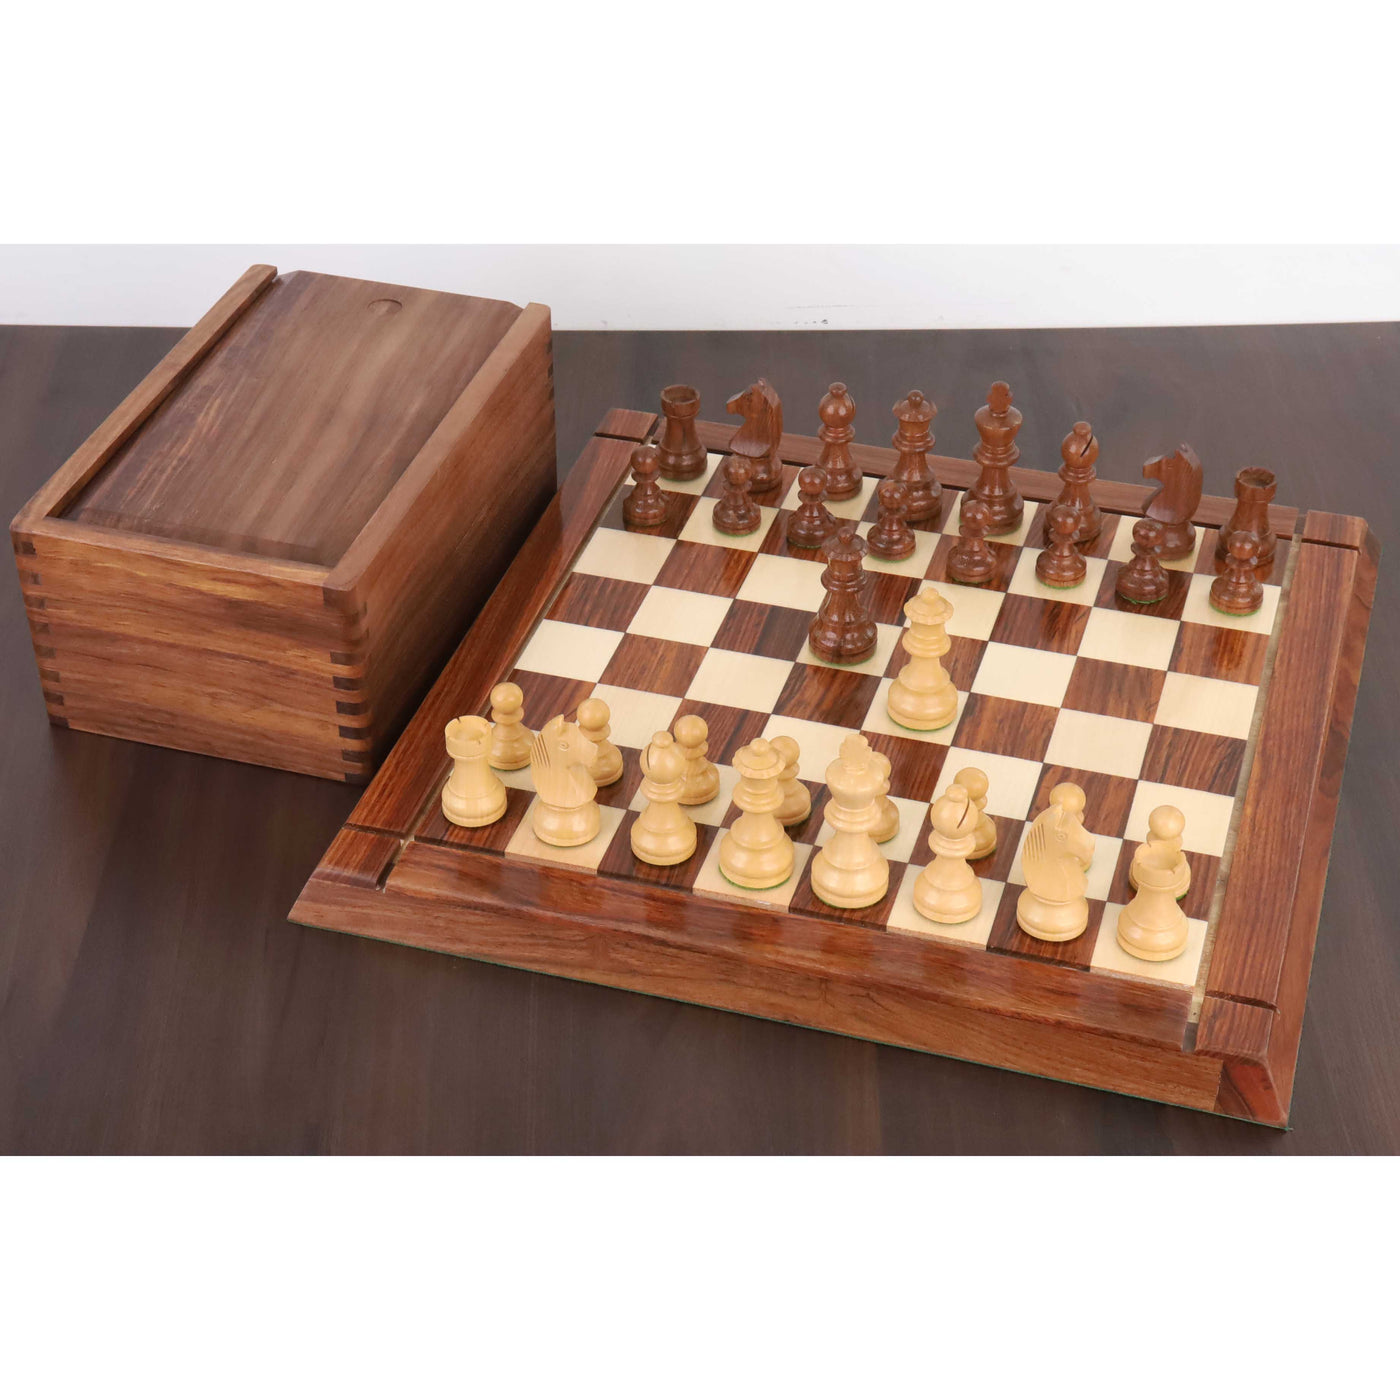 2.8" Tournament Staunton Chess Set - Chess Pieces Only - Golden Rosewood - Compact size